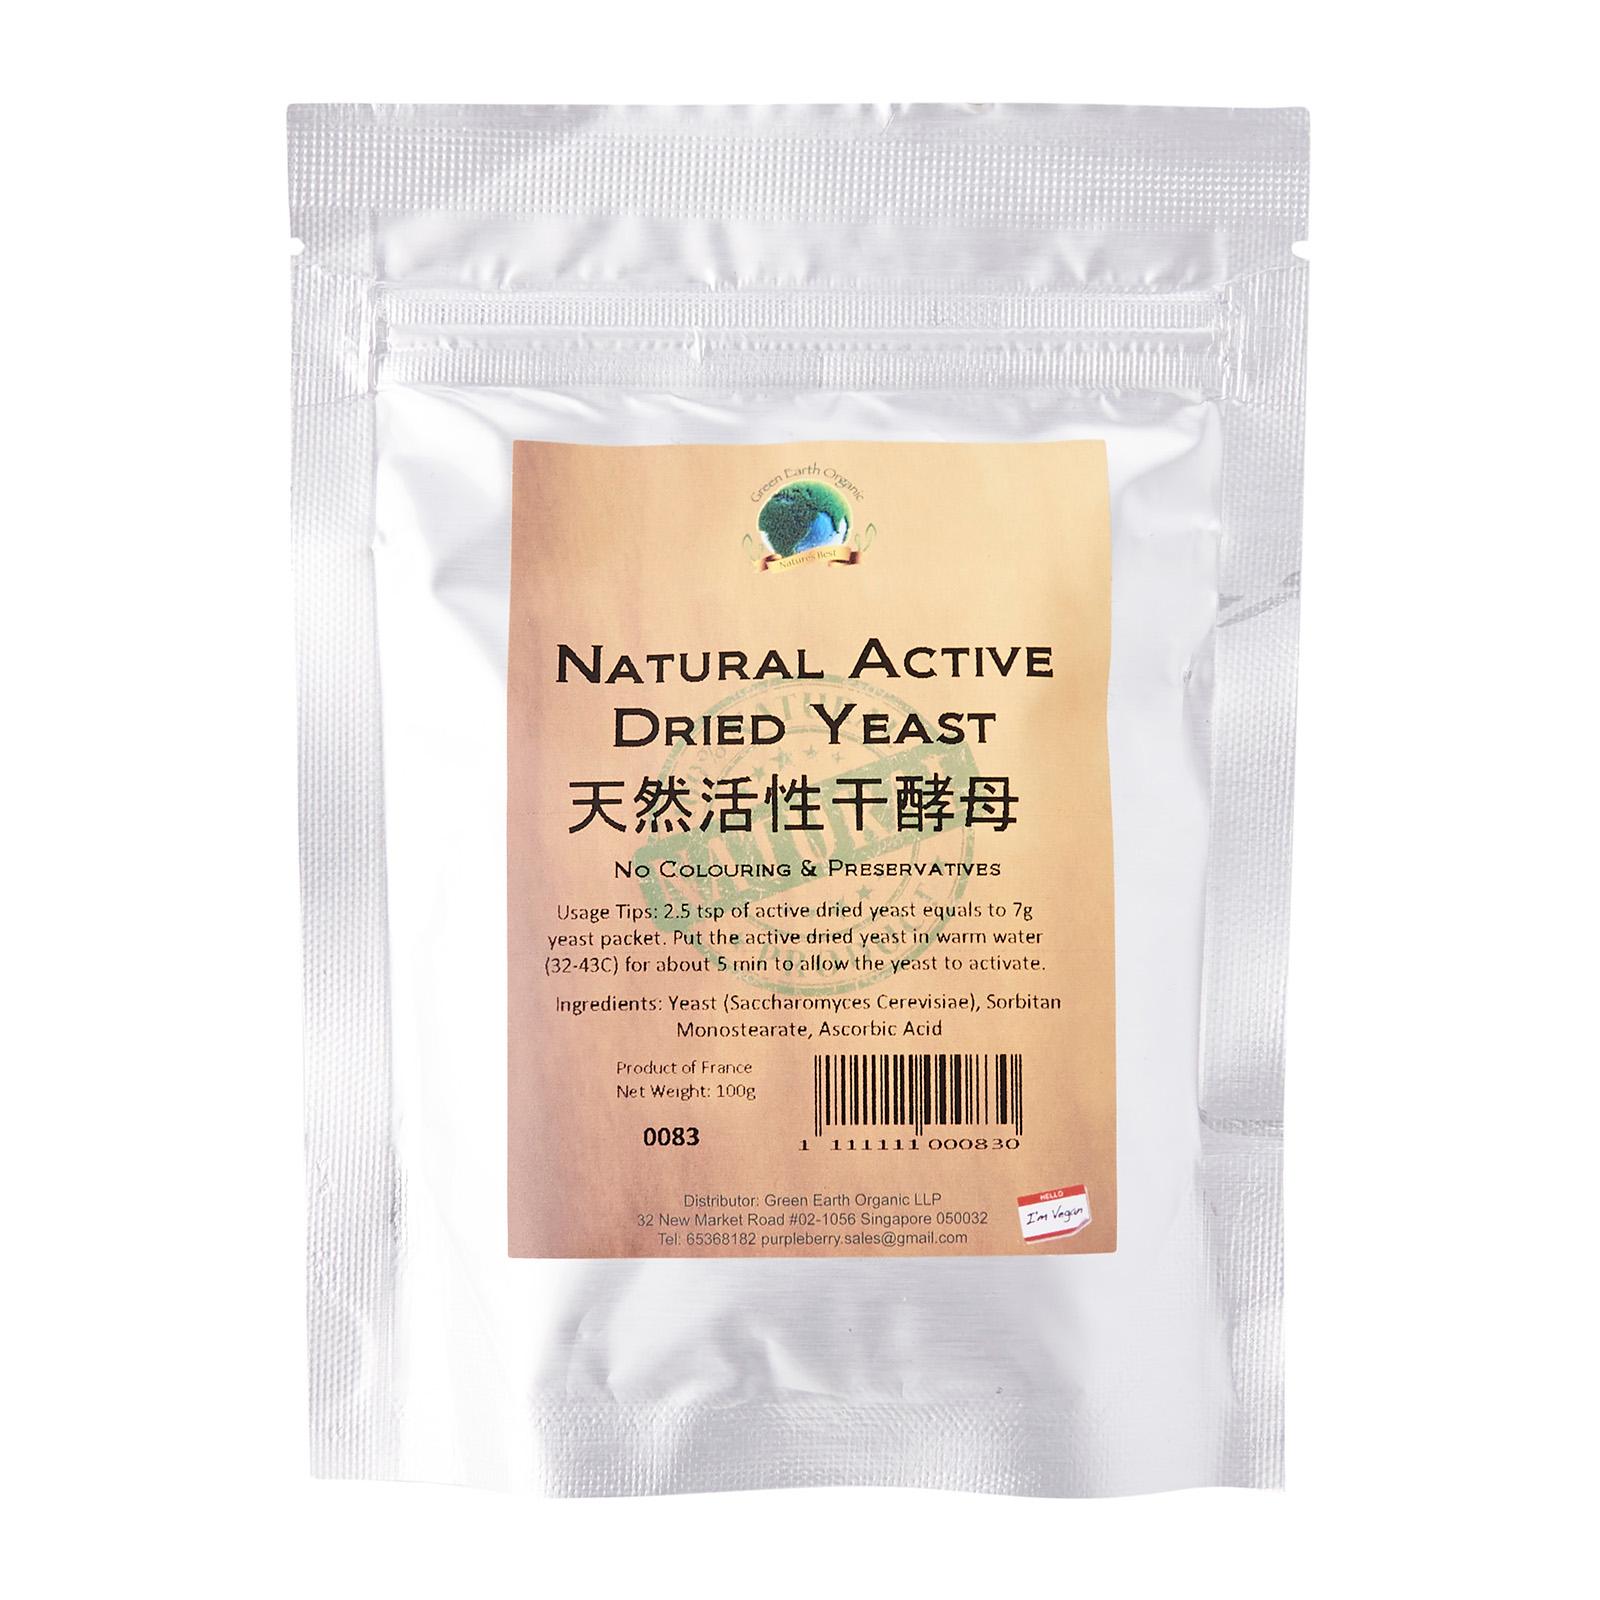 Natural Active Dried Yeast